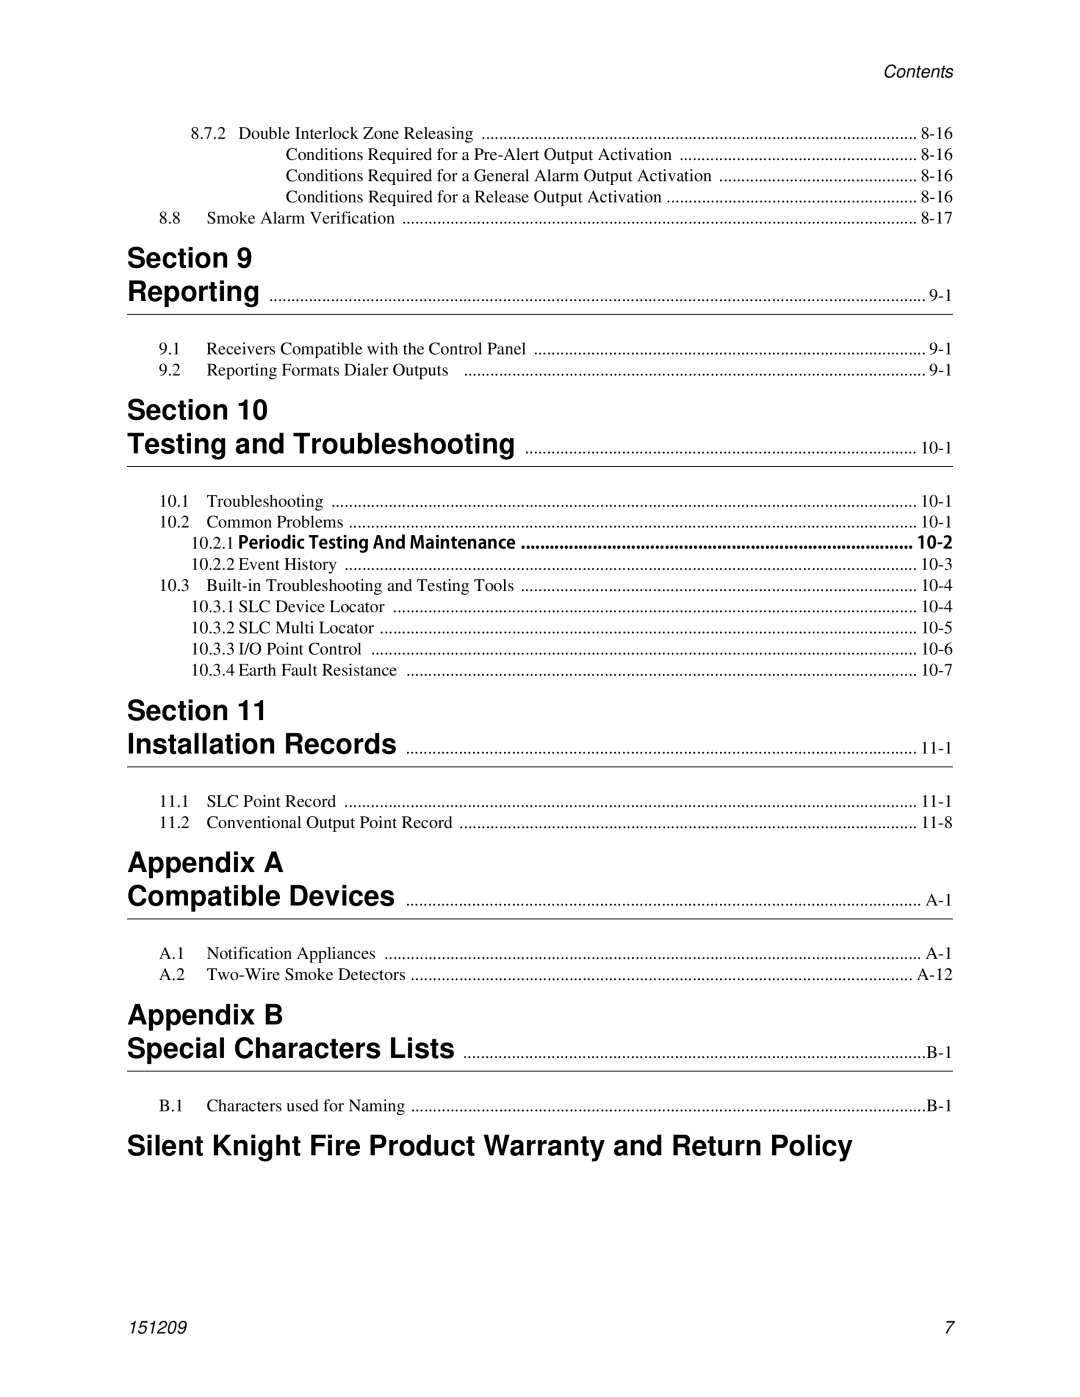 Honeywell 5820XL manual Appendix a, Appendix B, Silent Knight Fire Product Warranty and Return Policy, 10-2 